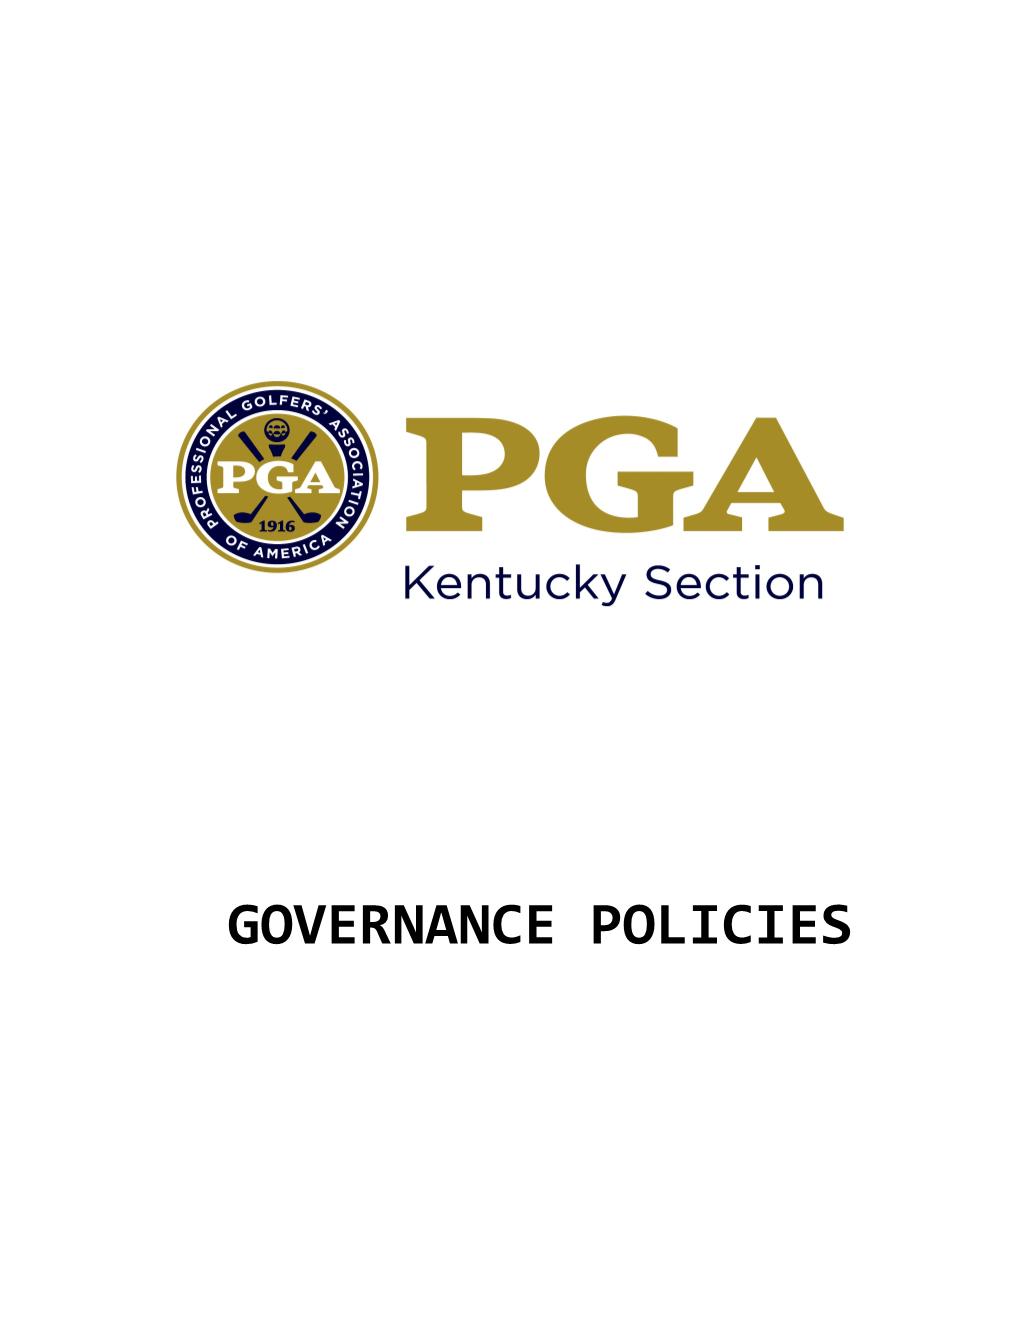 Attendance Policy for the PGA of America Annual Meeting